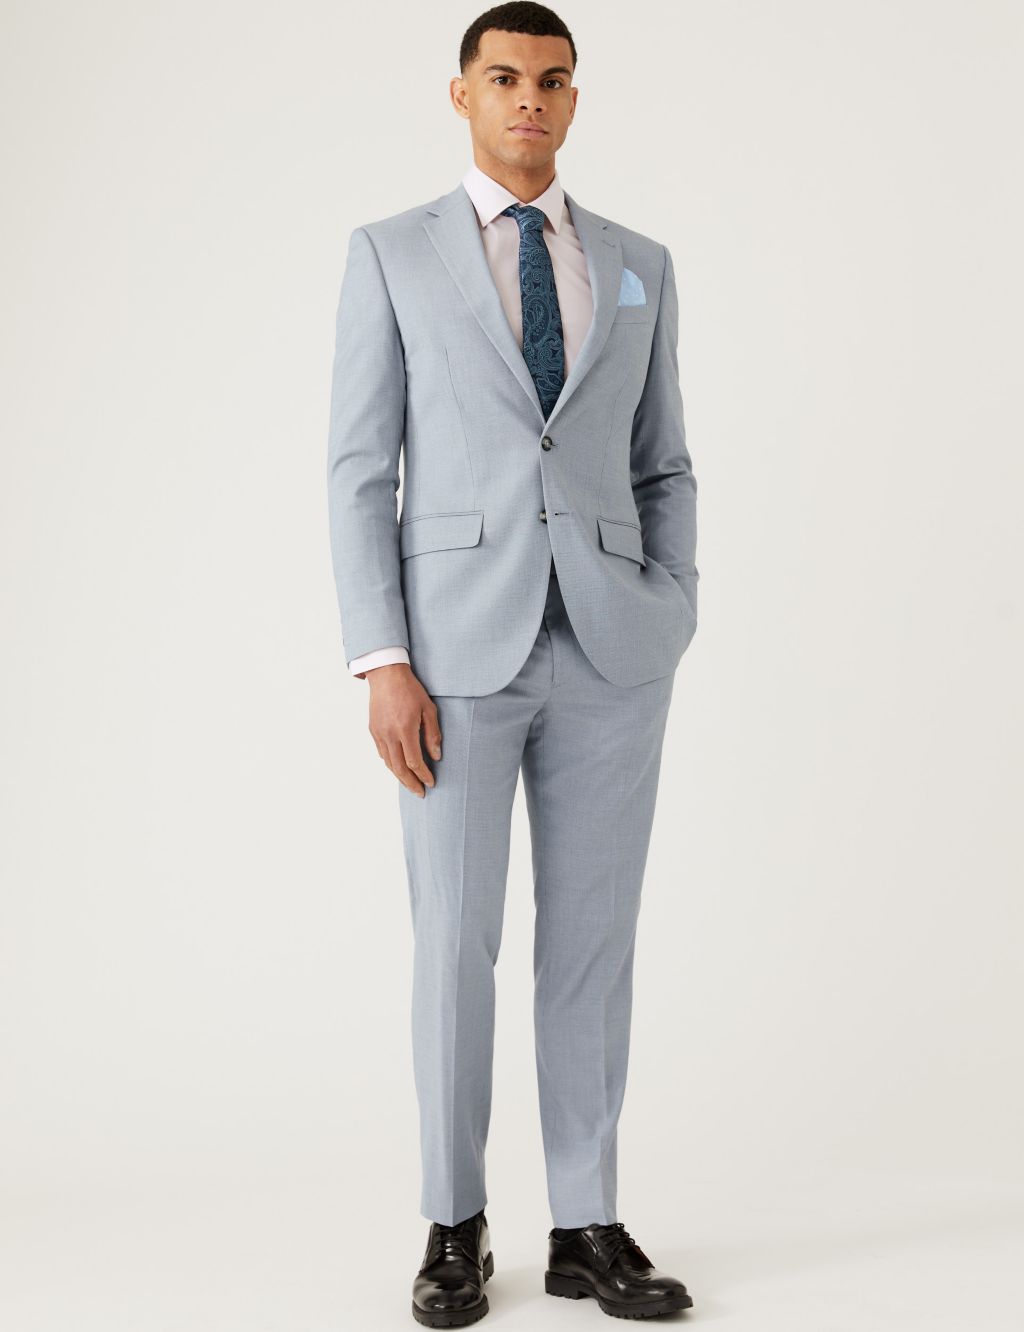 Slim Fit Micro Puppytooth Suit Jacket image 6